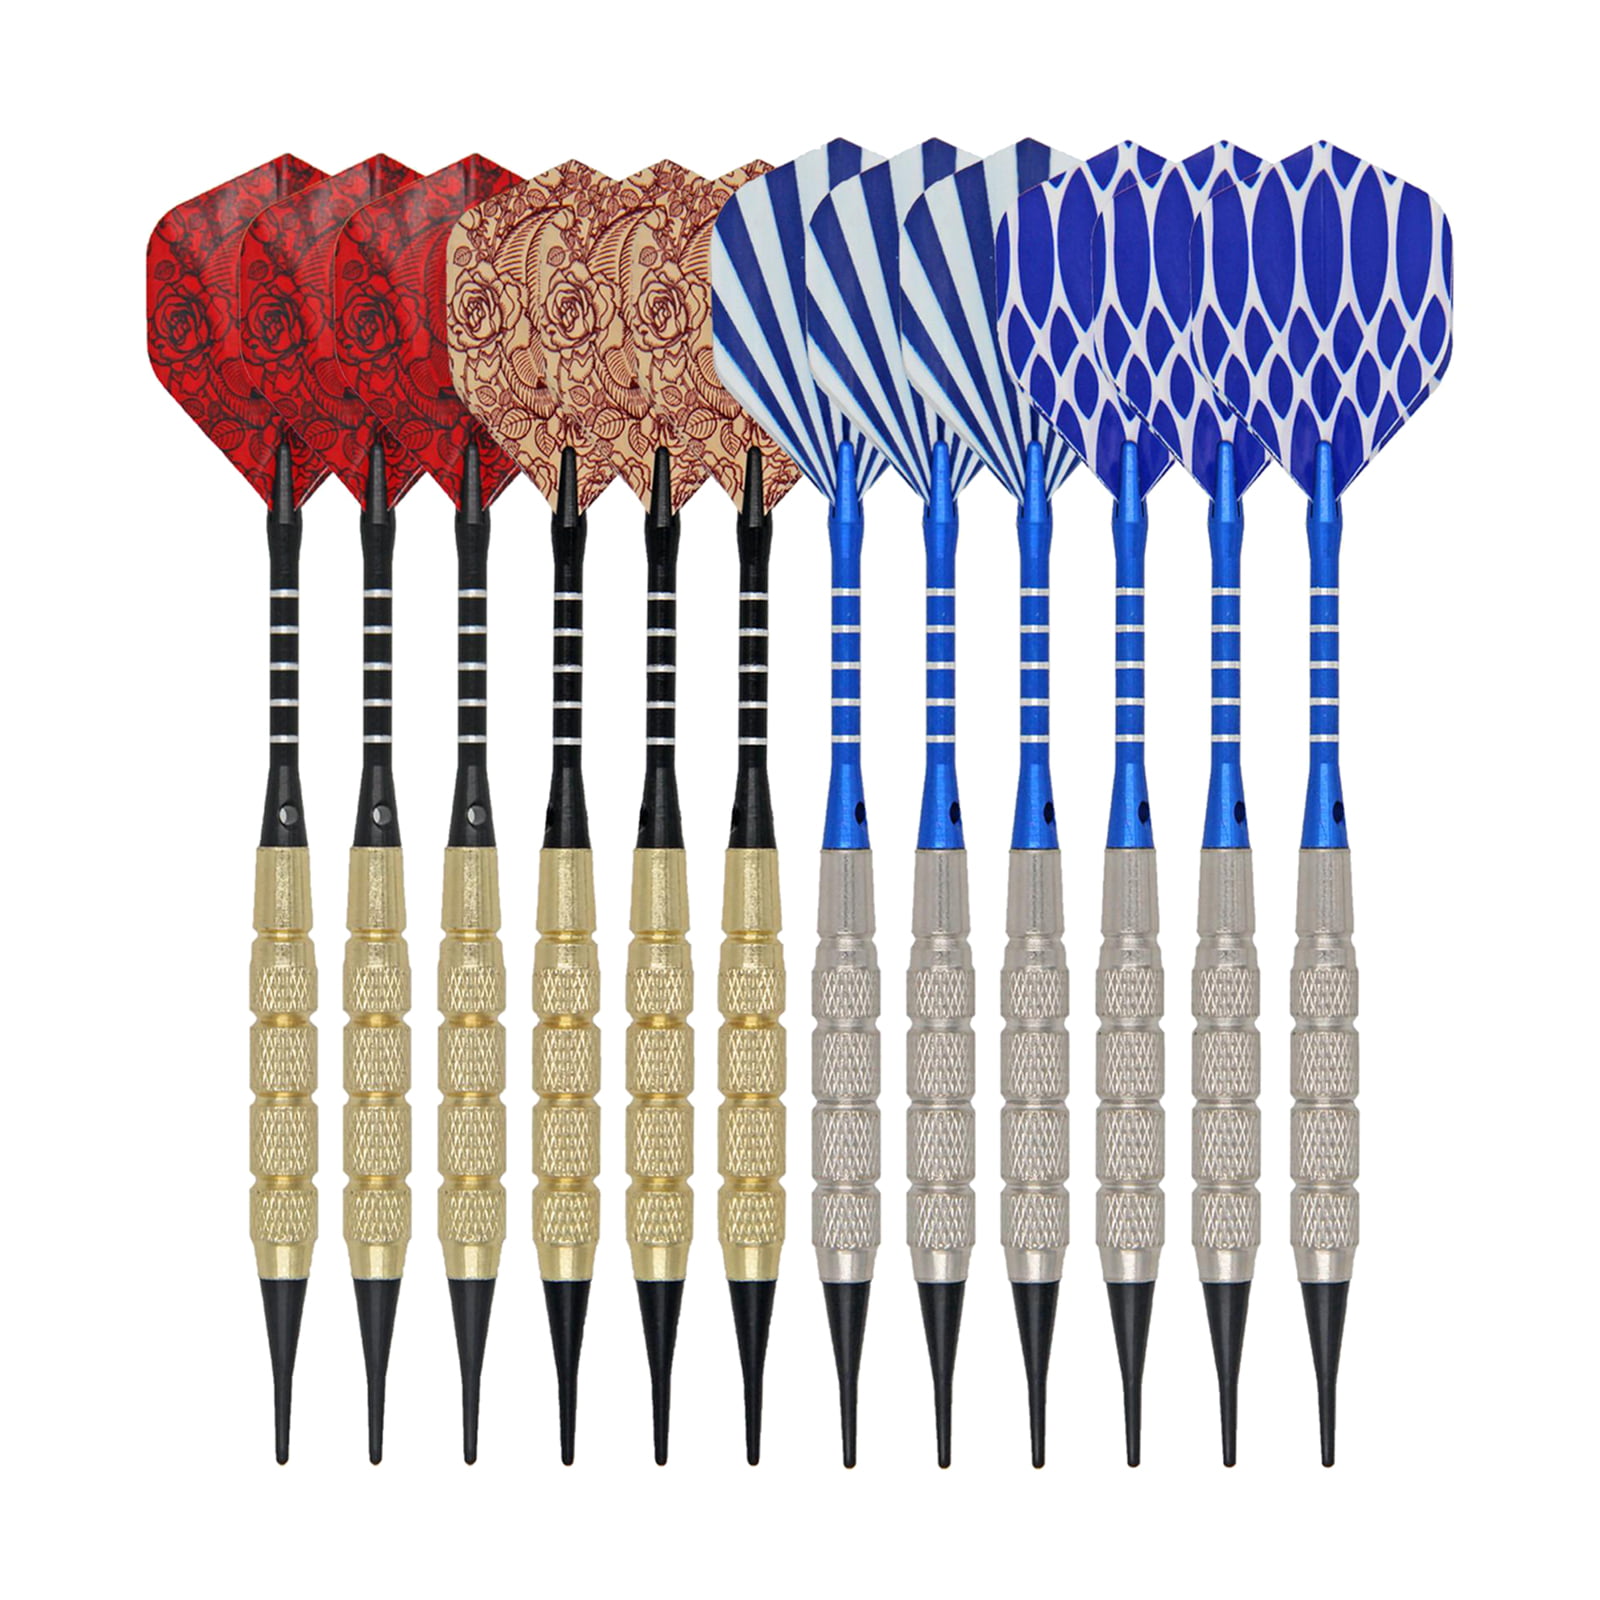 50 KEY POINT DARTS SOFT TIPS POINTS PACK OF REPLACEMENT Quality High K4U1 Z0J0 